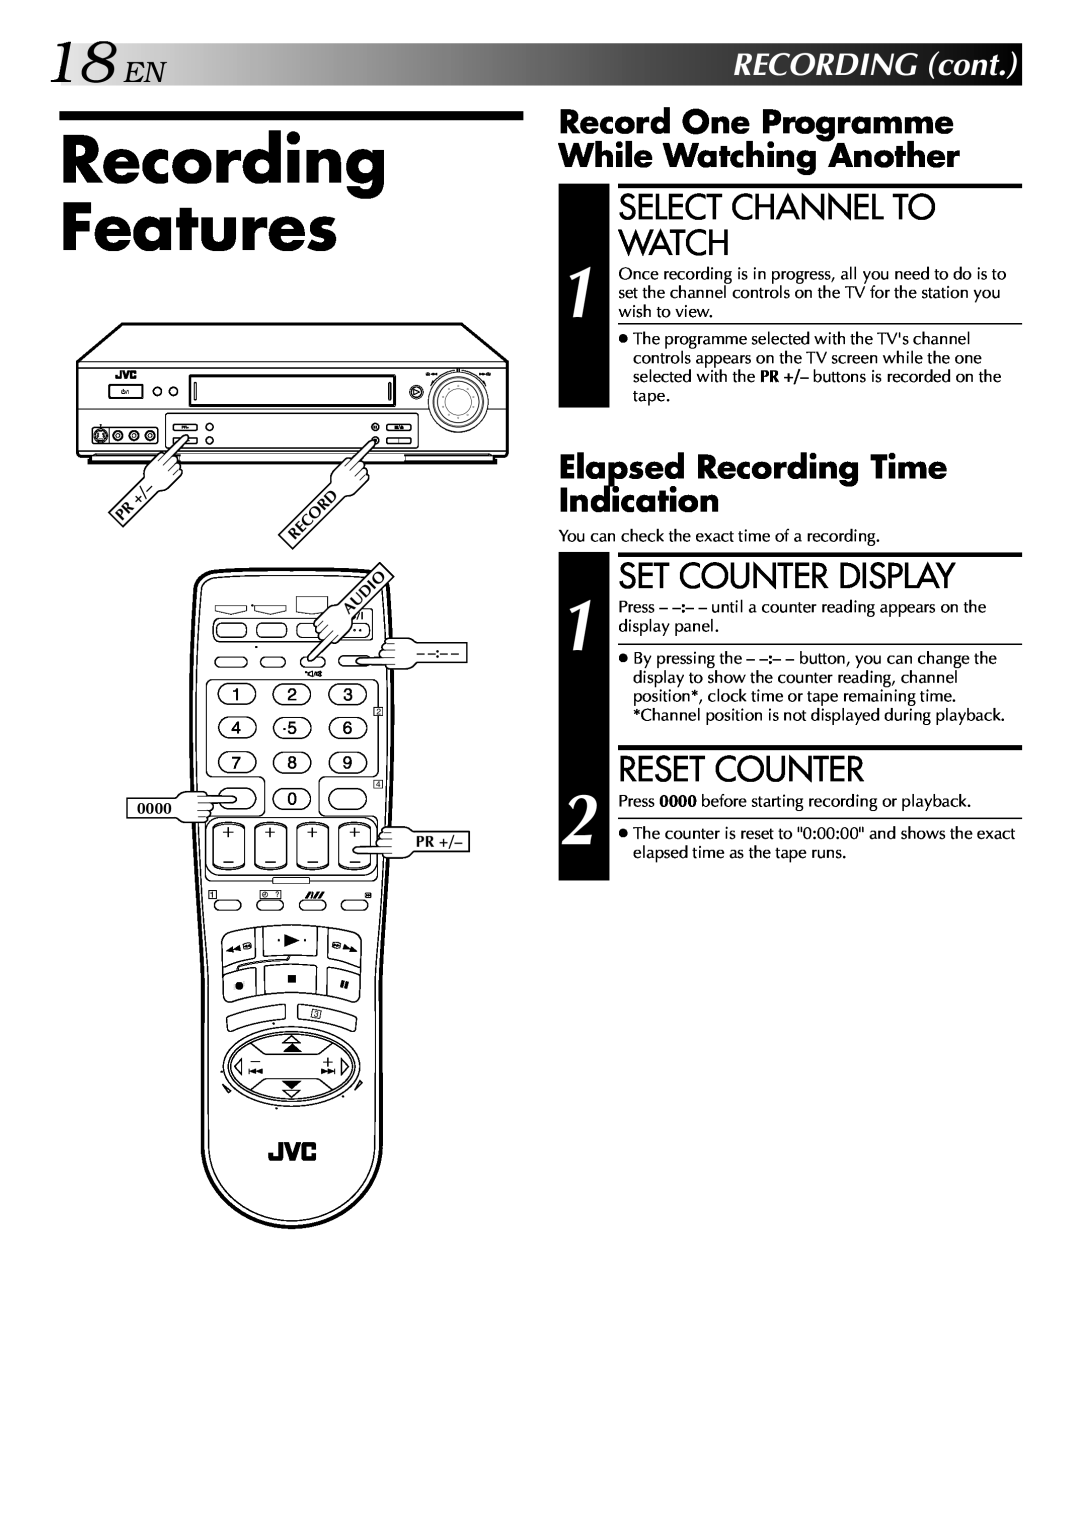 JVC HR-S5700AM Recording Features, Select Channel To Watch, Set Counter Display, 18ENRECORDING cont, Reset Counter 